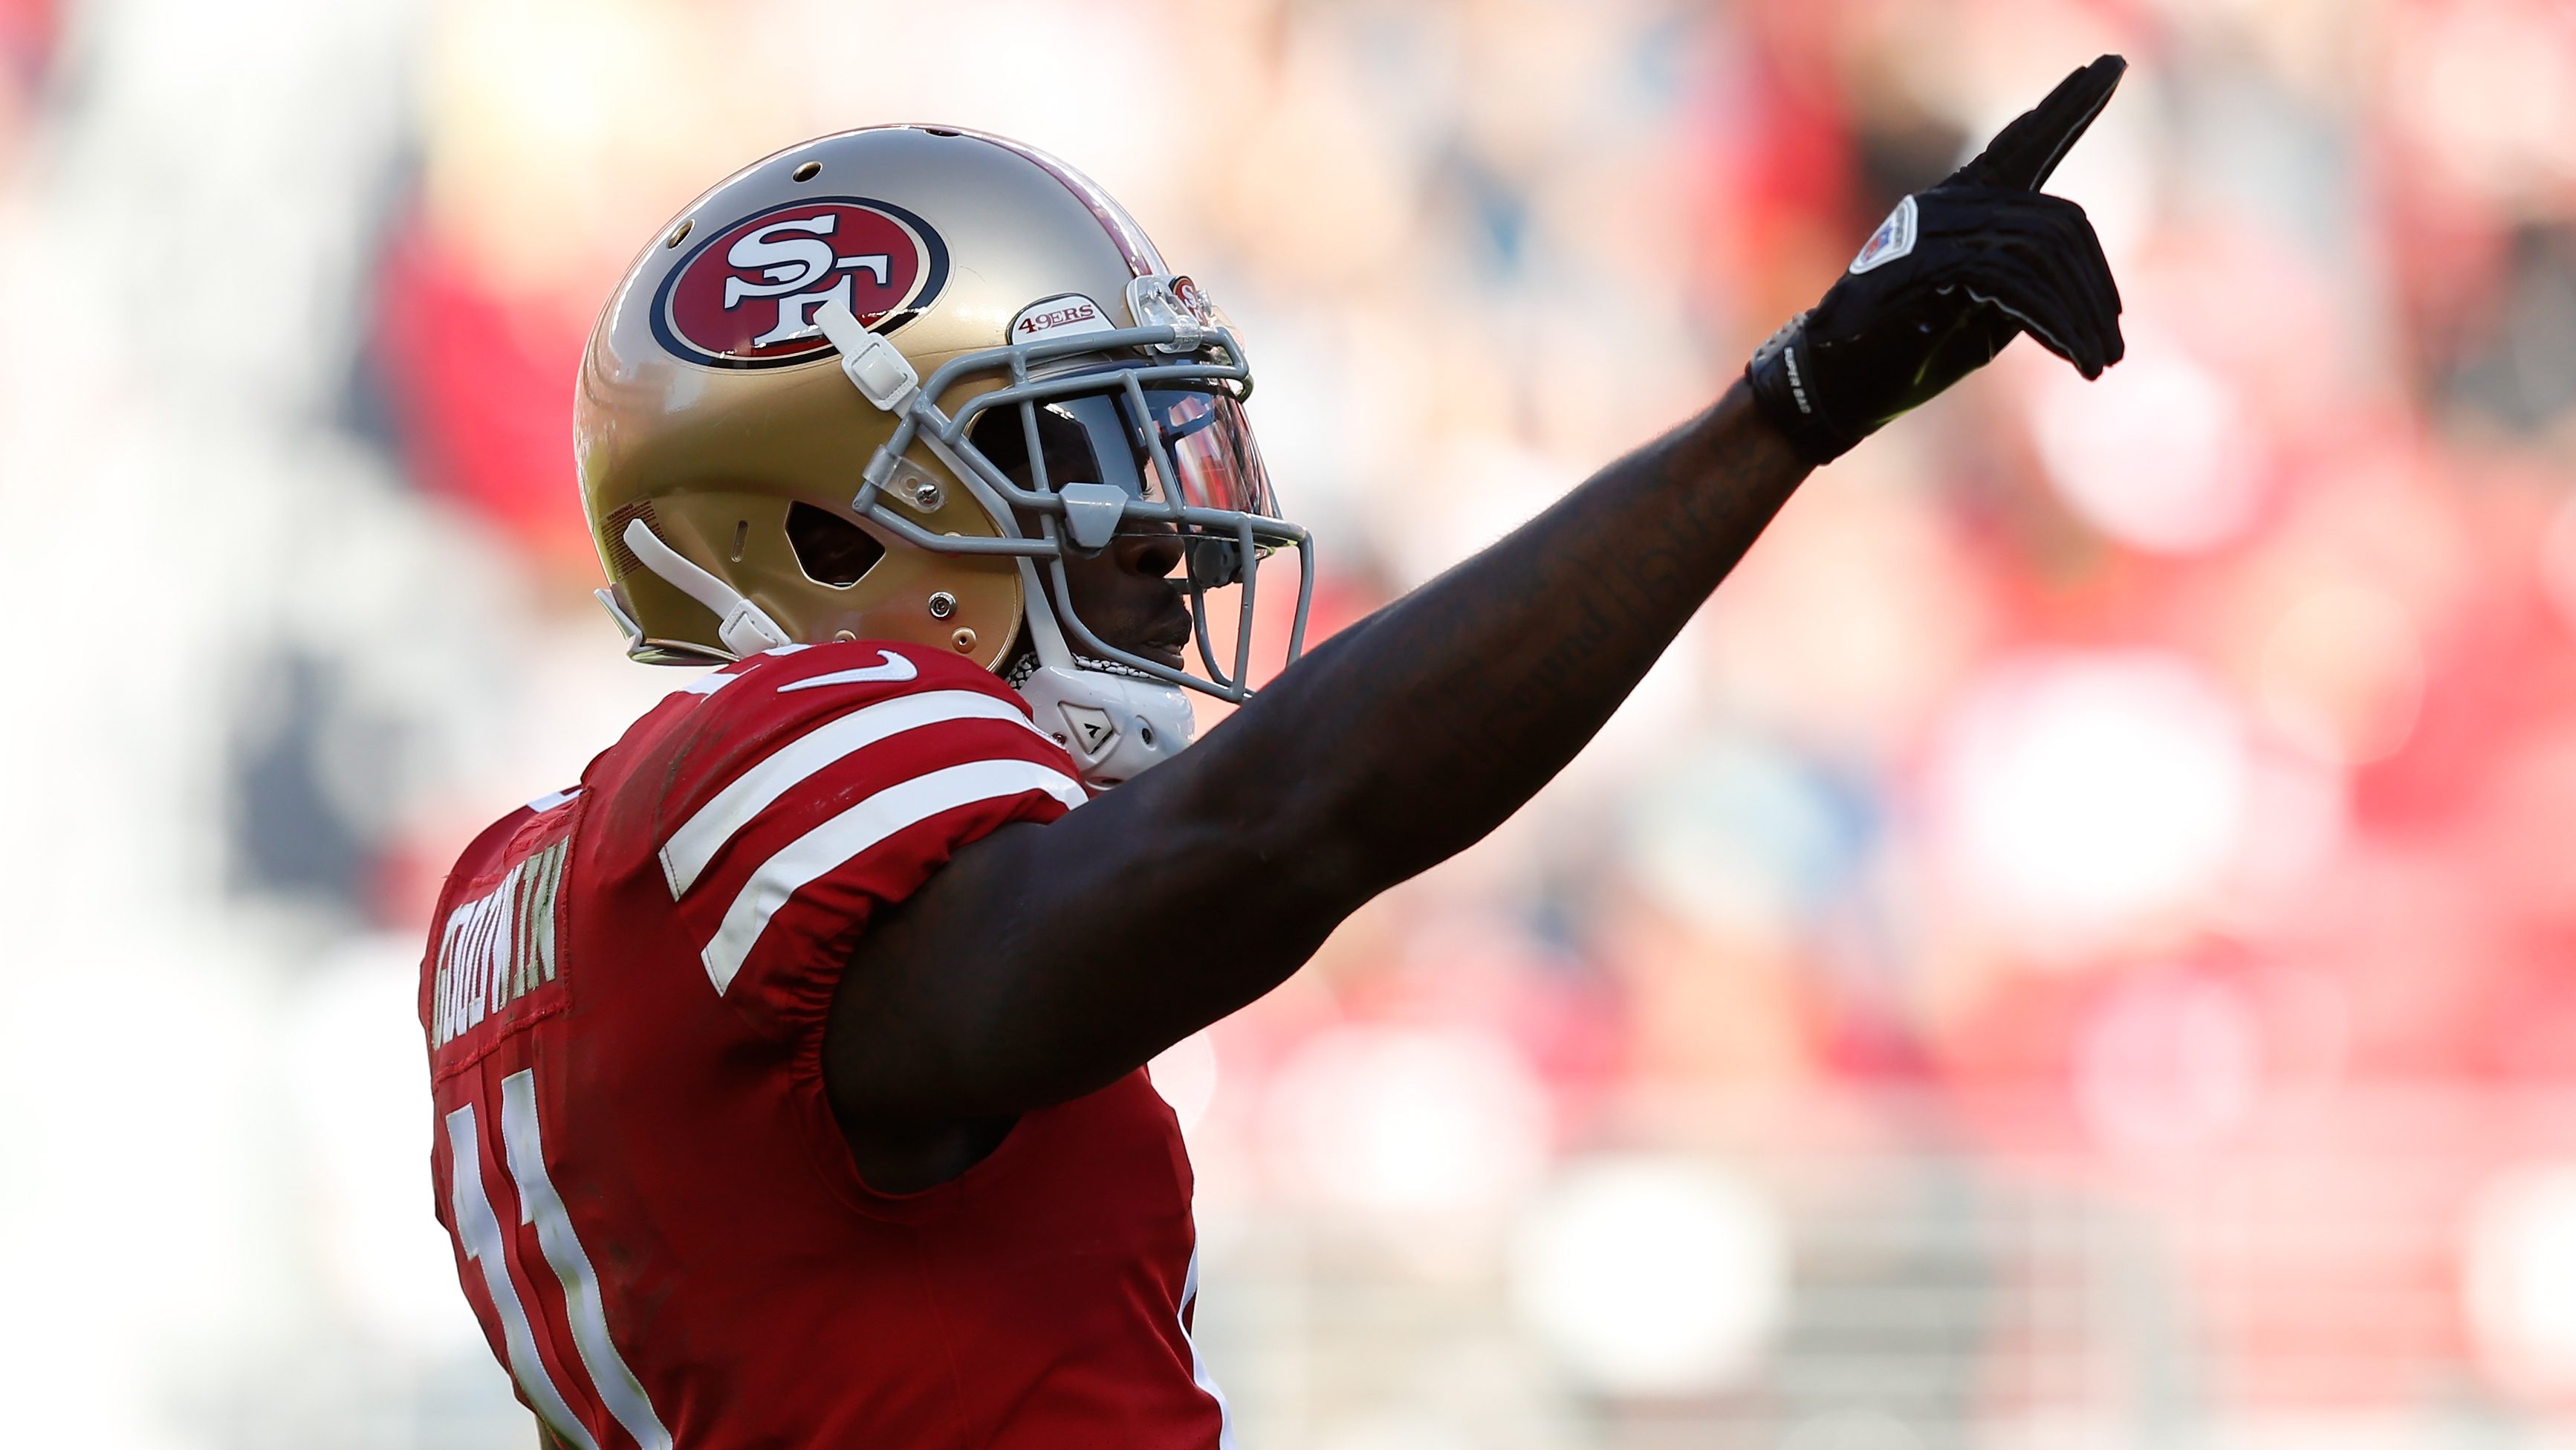 NFL player Marquise Goodwin trains for Olympics